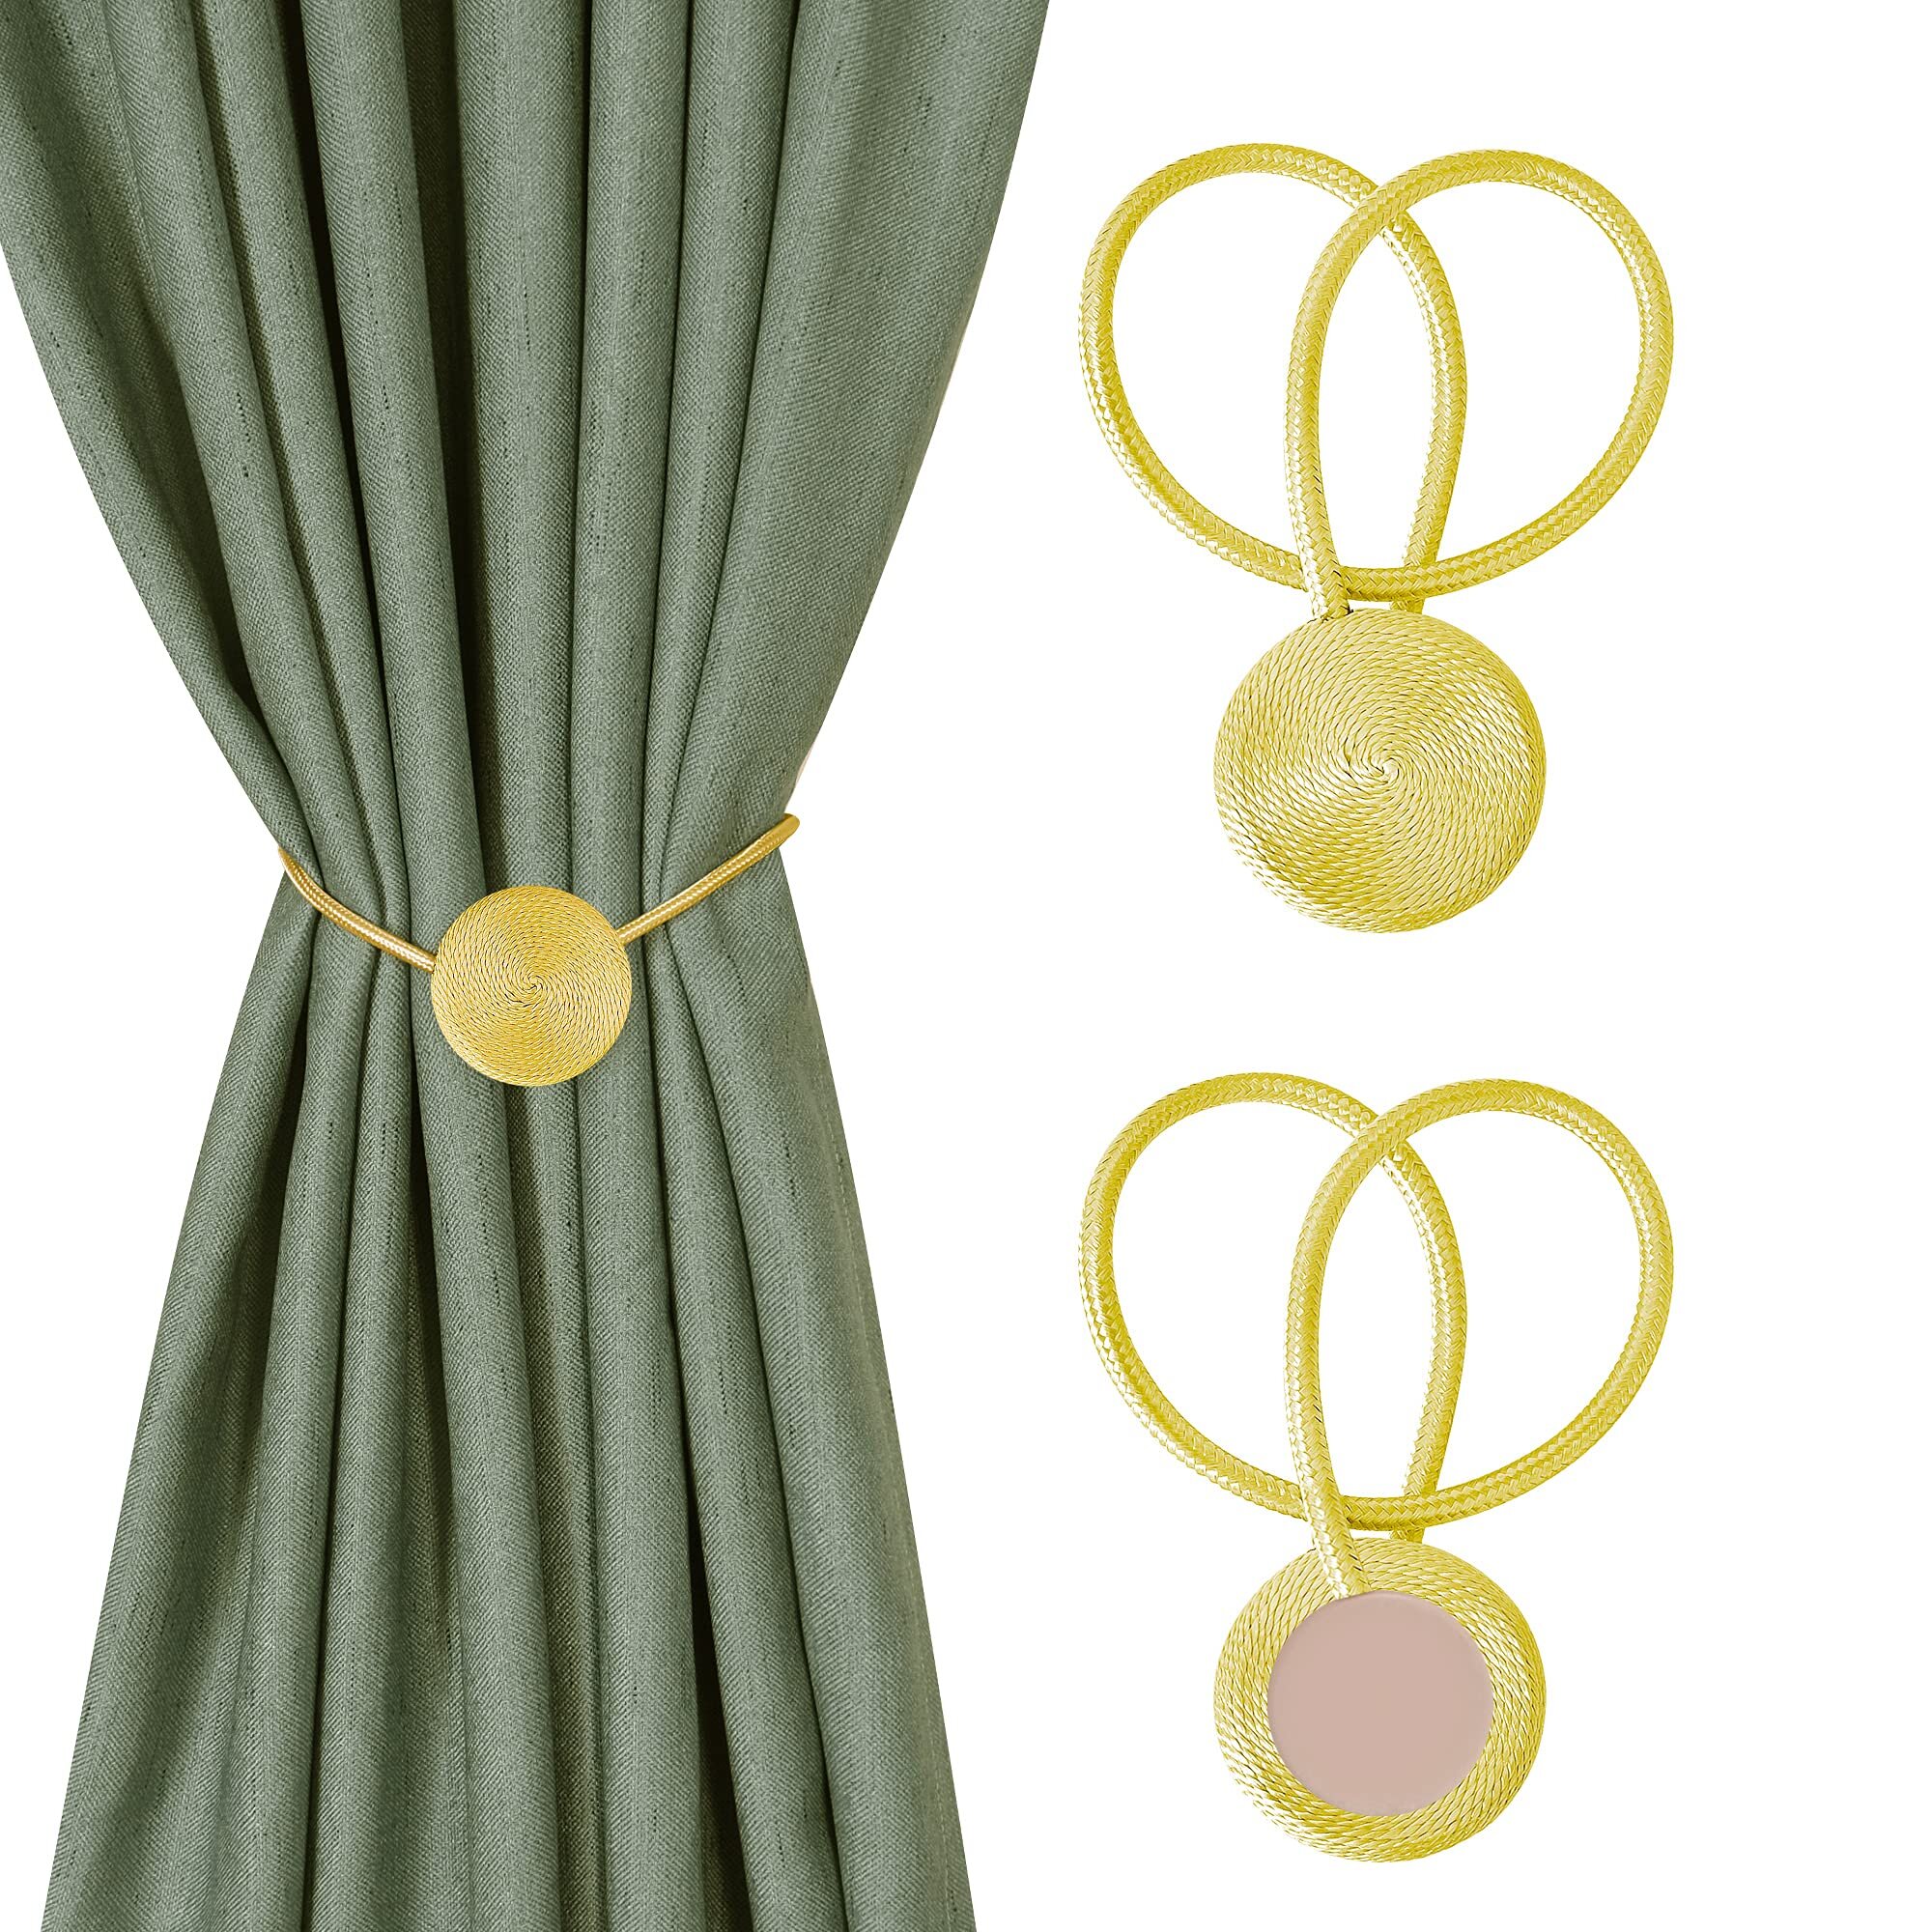 Teal LUYIMIN Magnetic Curtain Tiebacks Clips 2 Pack Drape Tie Backs Decorative Curtain Rope Holdbacks for Home Kitchen Office Window Drapes,No Drilling & Holes Required